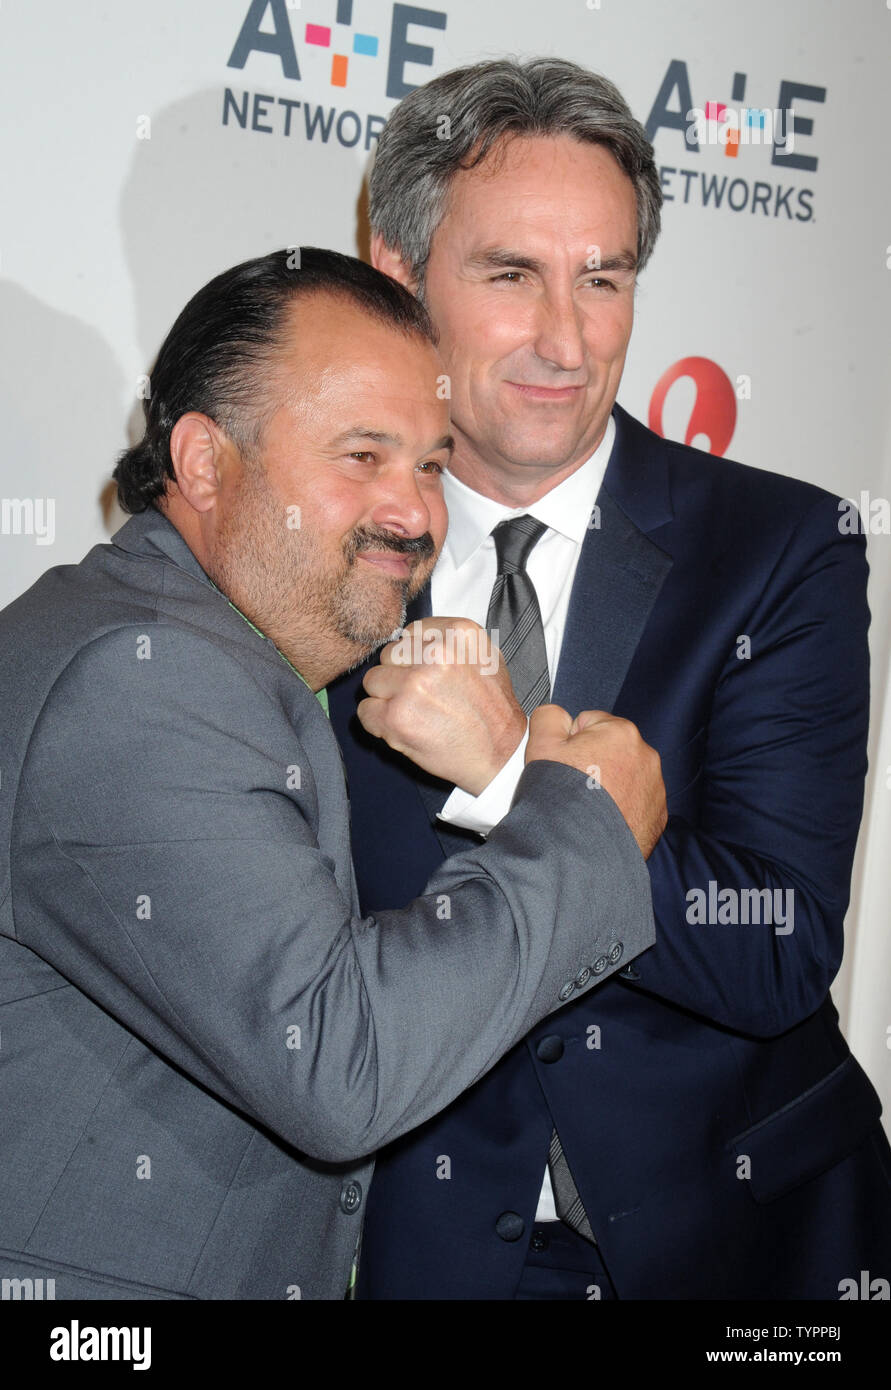 Frank Fritz and Mike Wolfe arrive on the red carpet at the 2015 A+E Network Upfront at Park Avenue Armory in New York City on April 30, 2015.     Photo by Dennis Van Tine/UPI Stock Photo